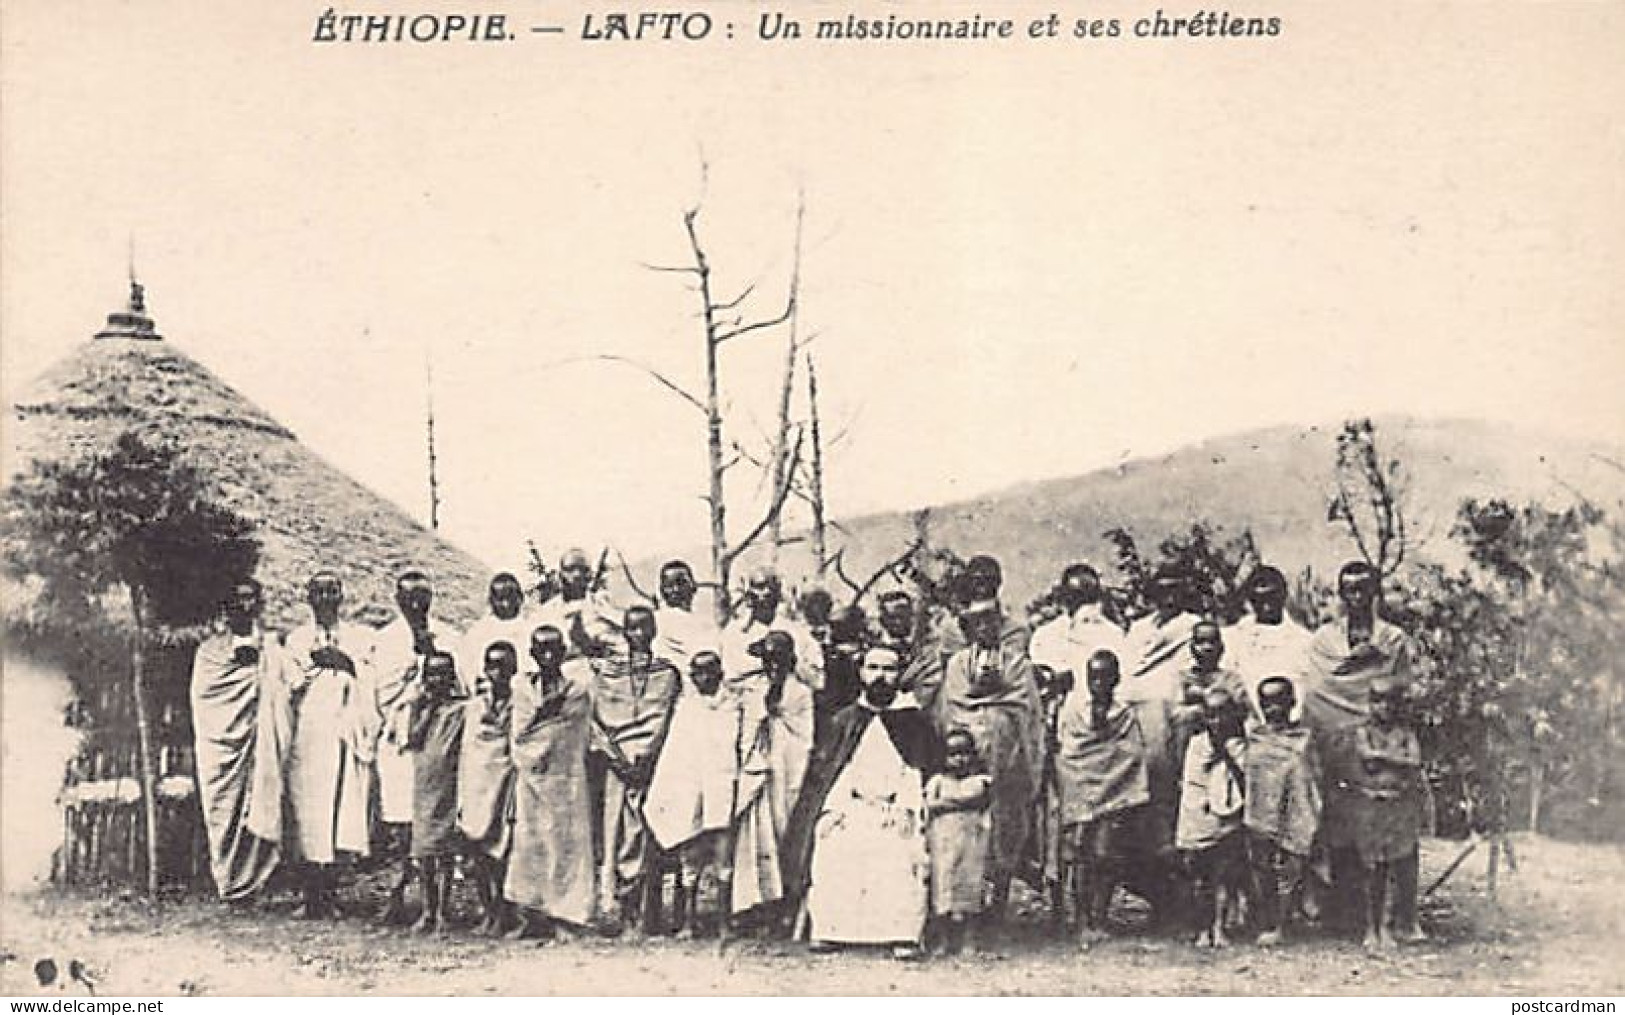 Ethiopia - LAFTO - A Missionary And His Christians - Publ. Franciscan Voices - Ethiopie